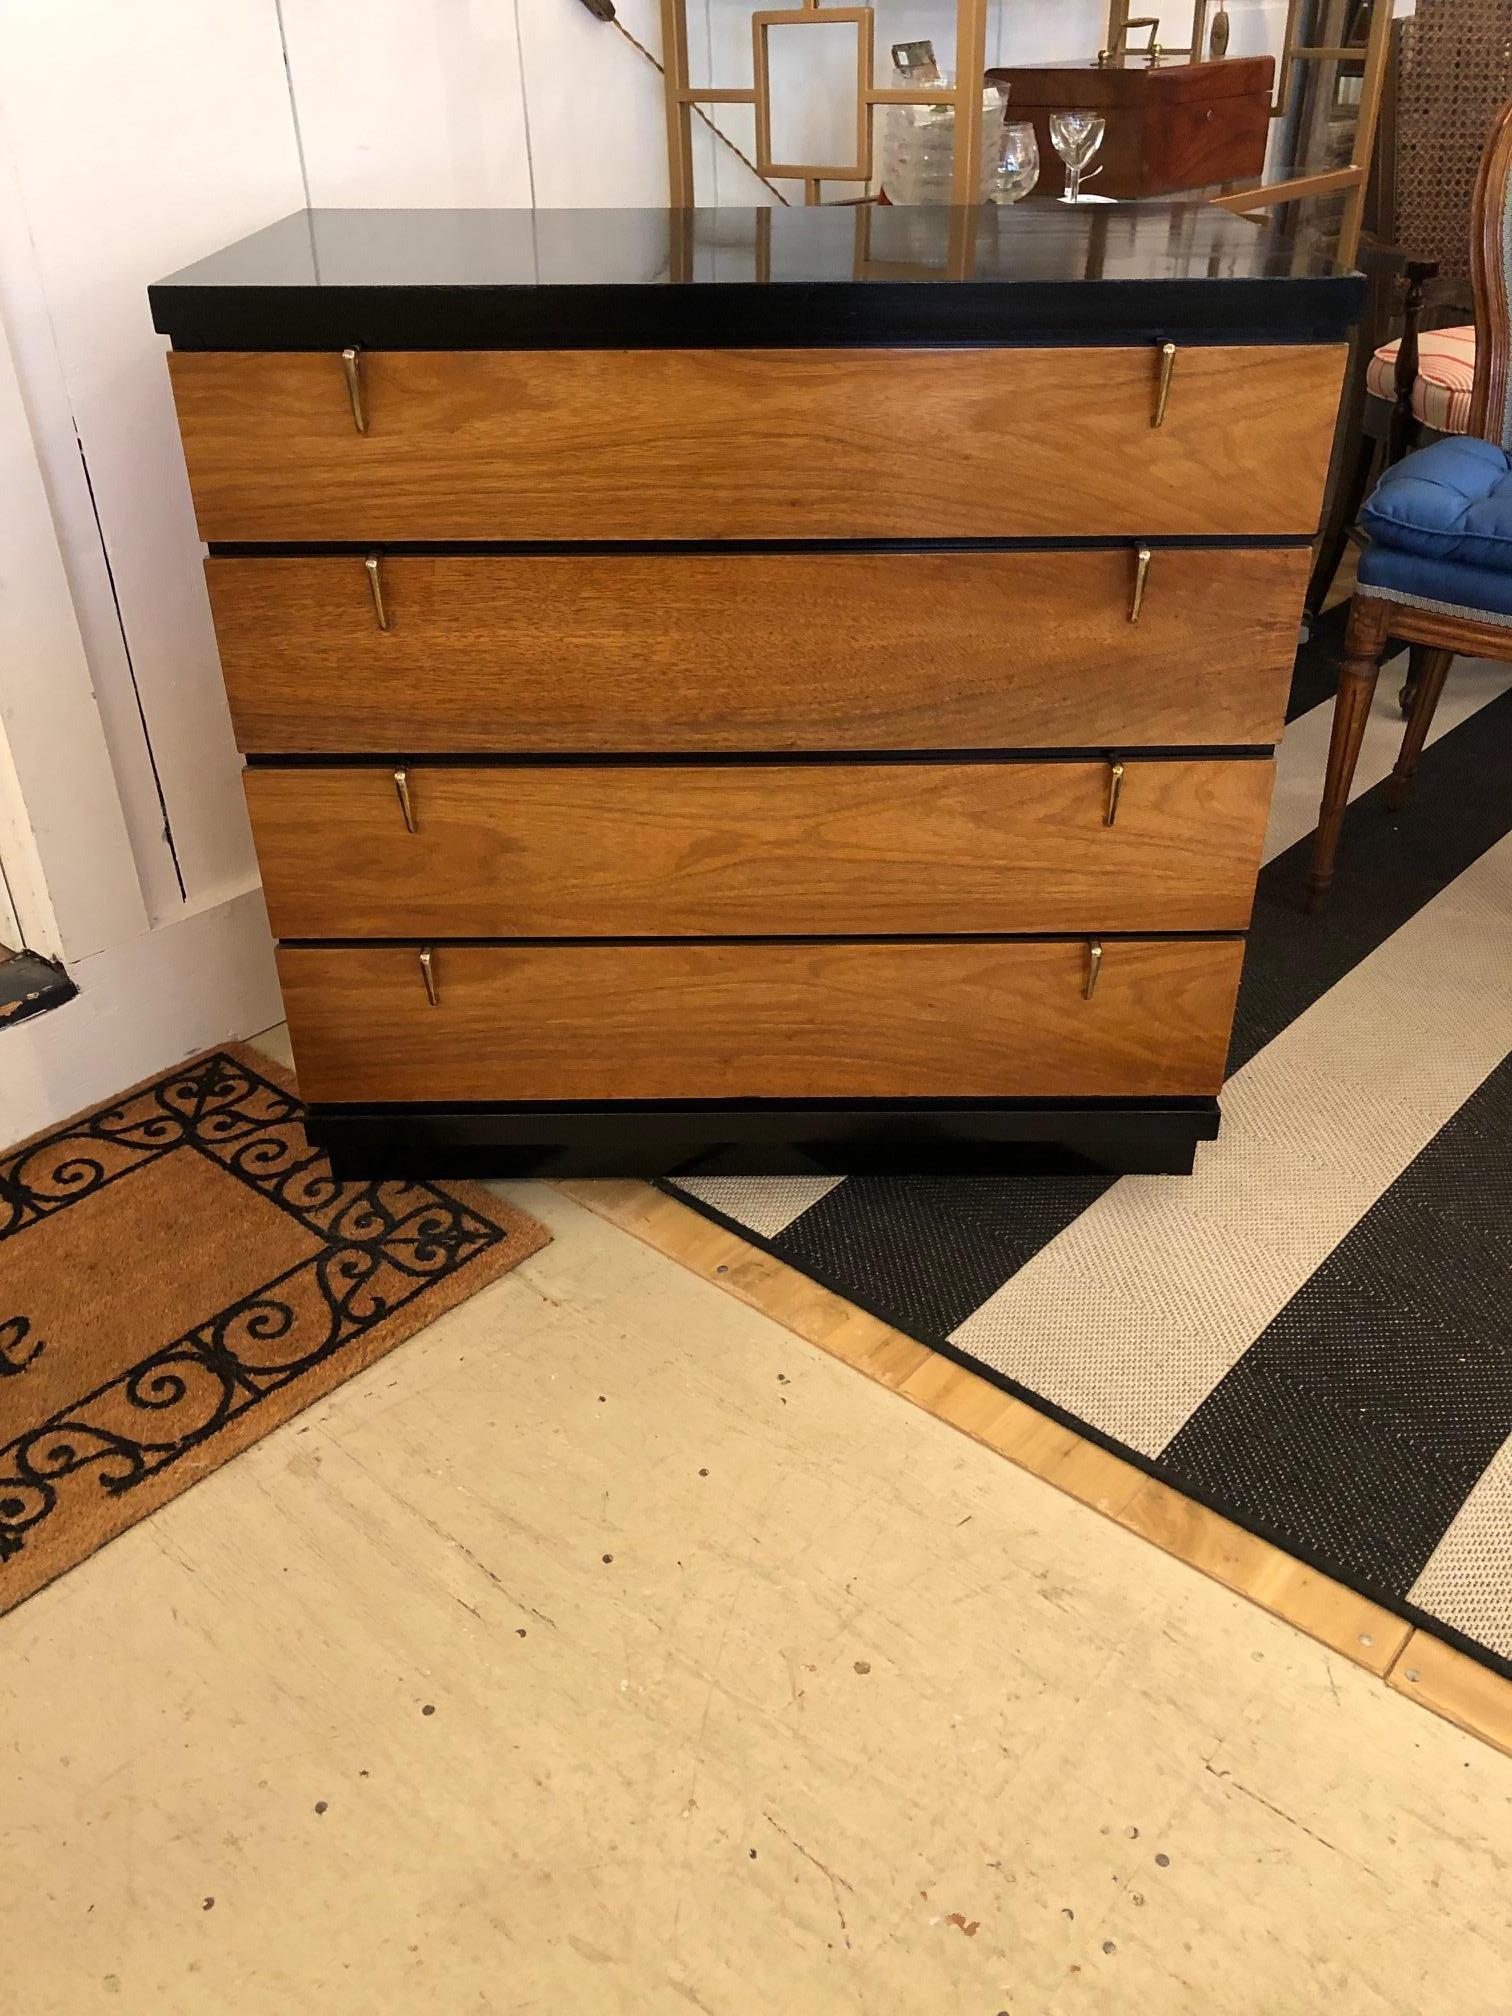 Sleek blonde walnut & ebonized wood chest of drawers having black formica top and four drawers. We love the brass stylish hardware and mid century silhouette. 
New glass to protect the top is included.  Maker is Johnson Carpen.